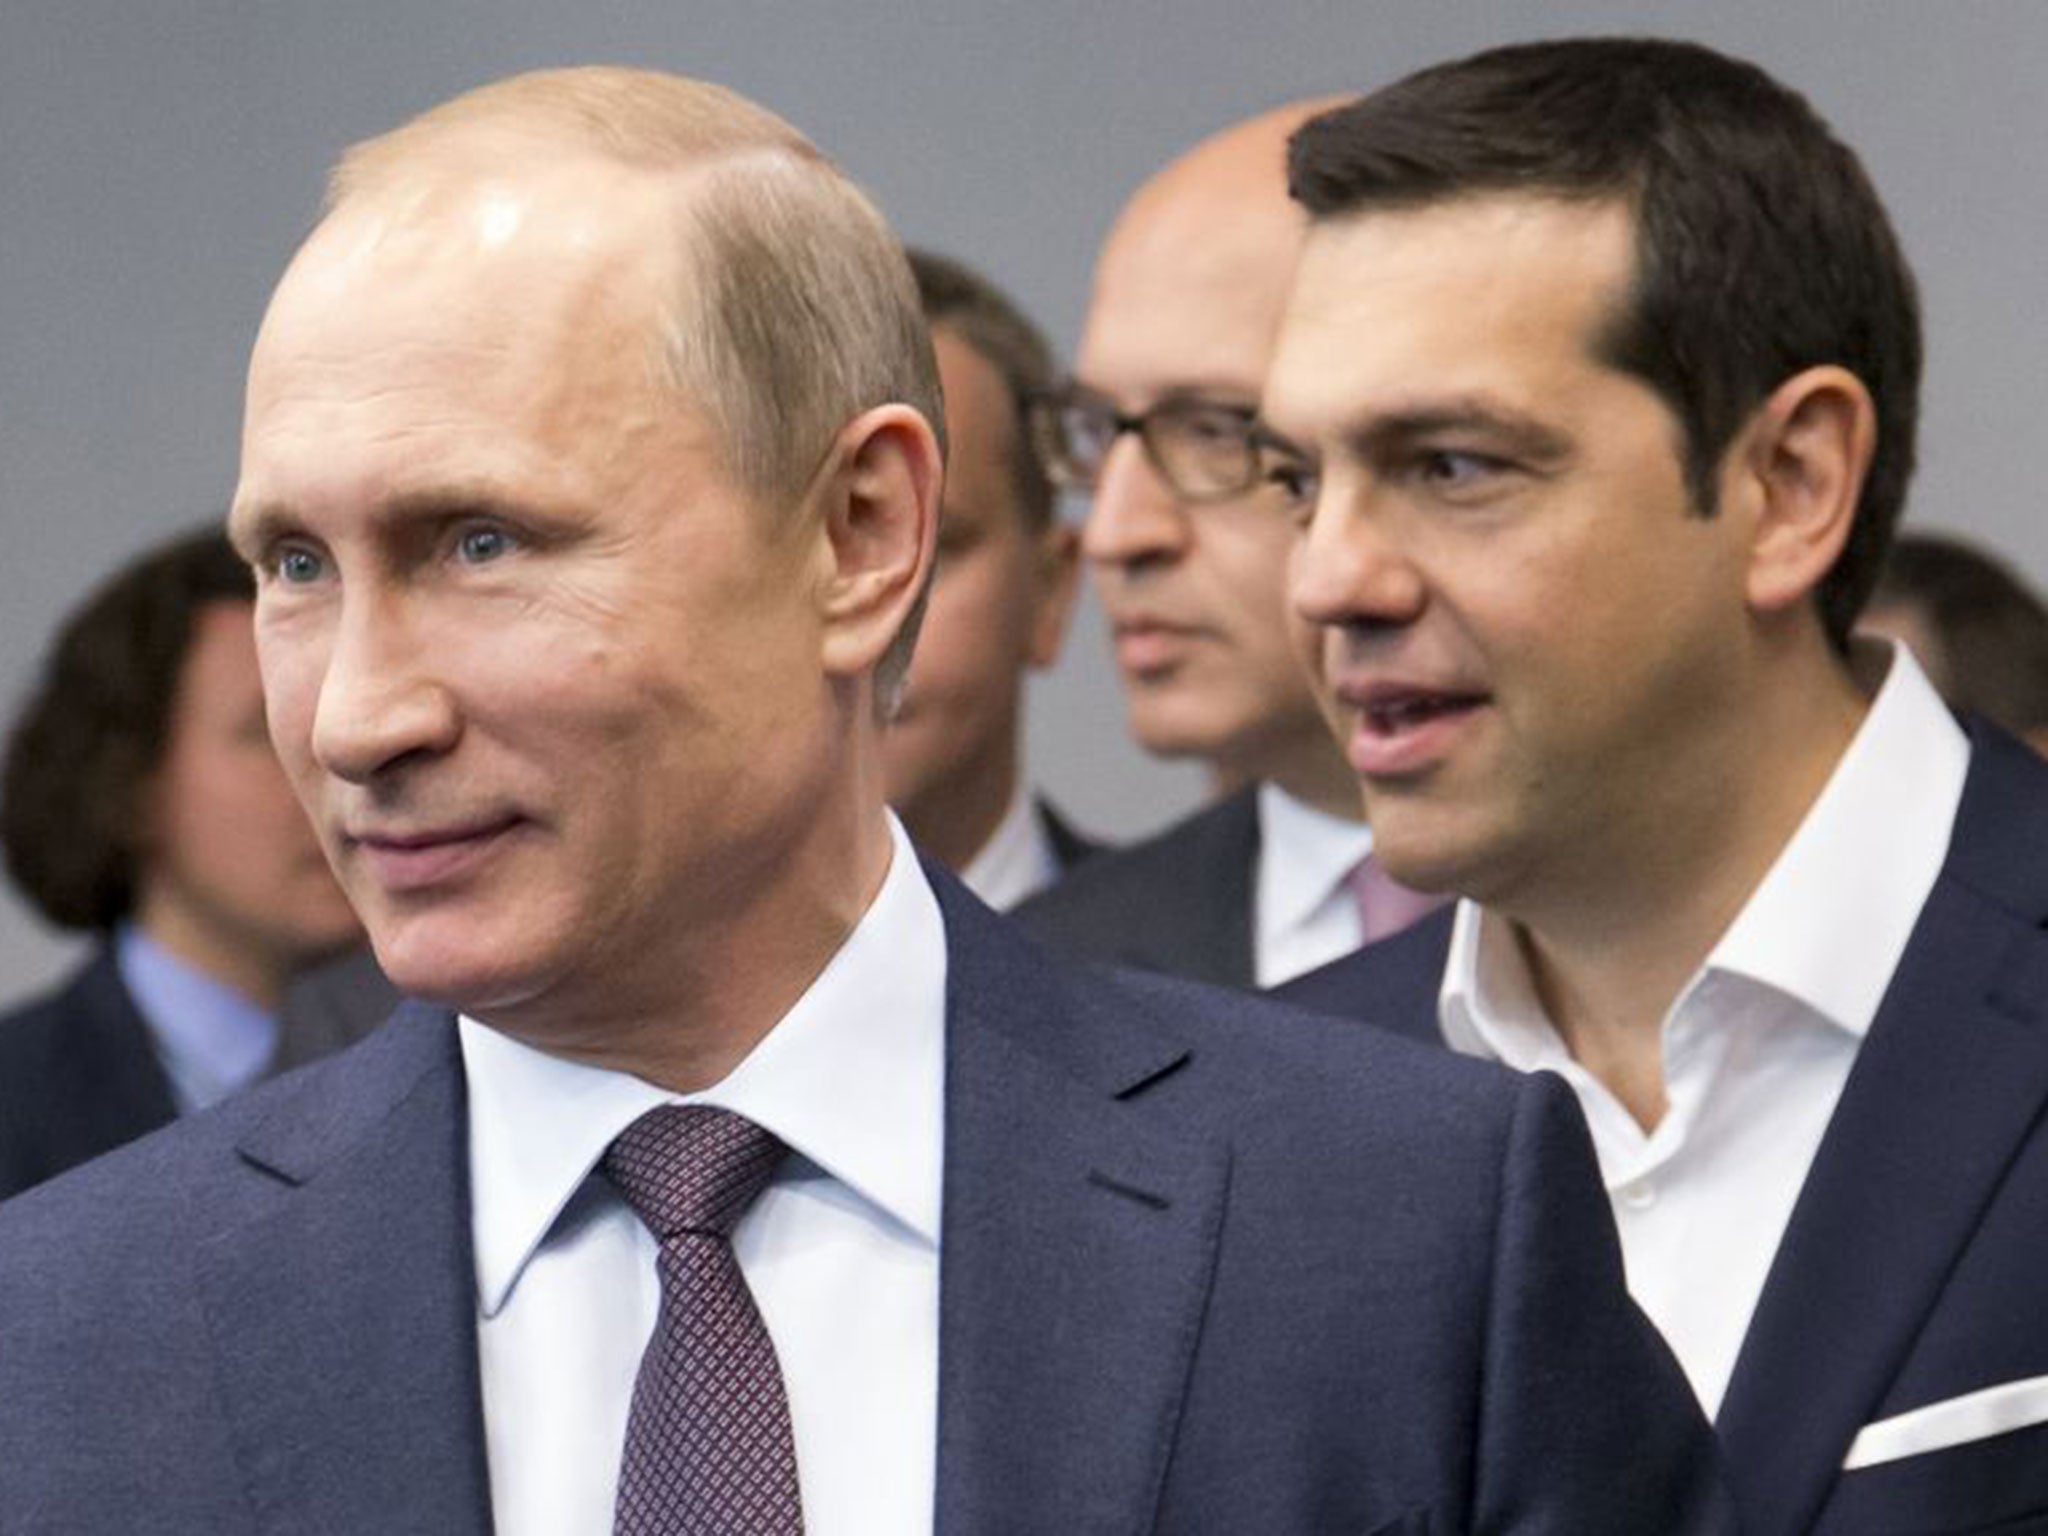 Russian President Vladimir Putin, foreground, and Greek Prime Minister, behind him, Alexis Tsipras arrive for their talks at the St. Petersburg International Investment Forum in St.Petersburg, Russia, Friday, June 19, 2015.